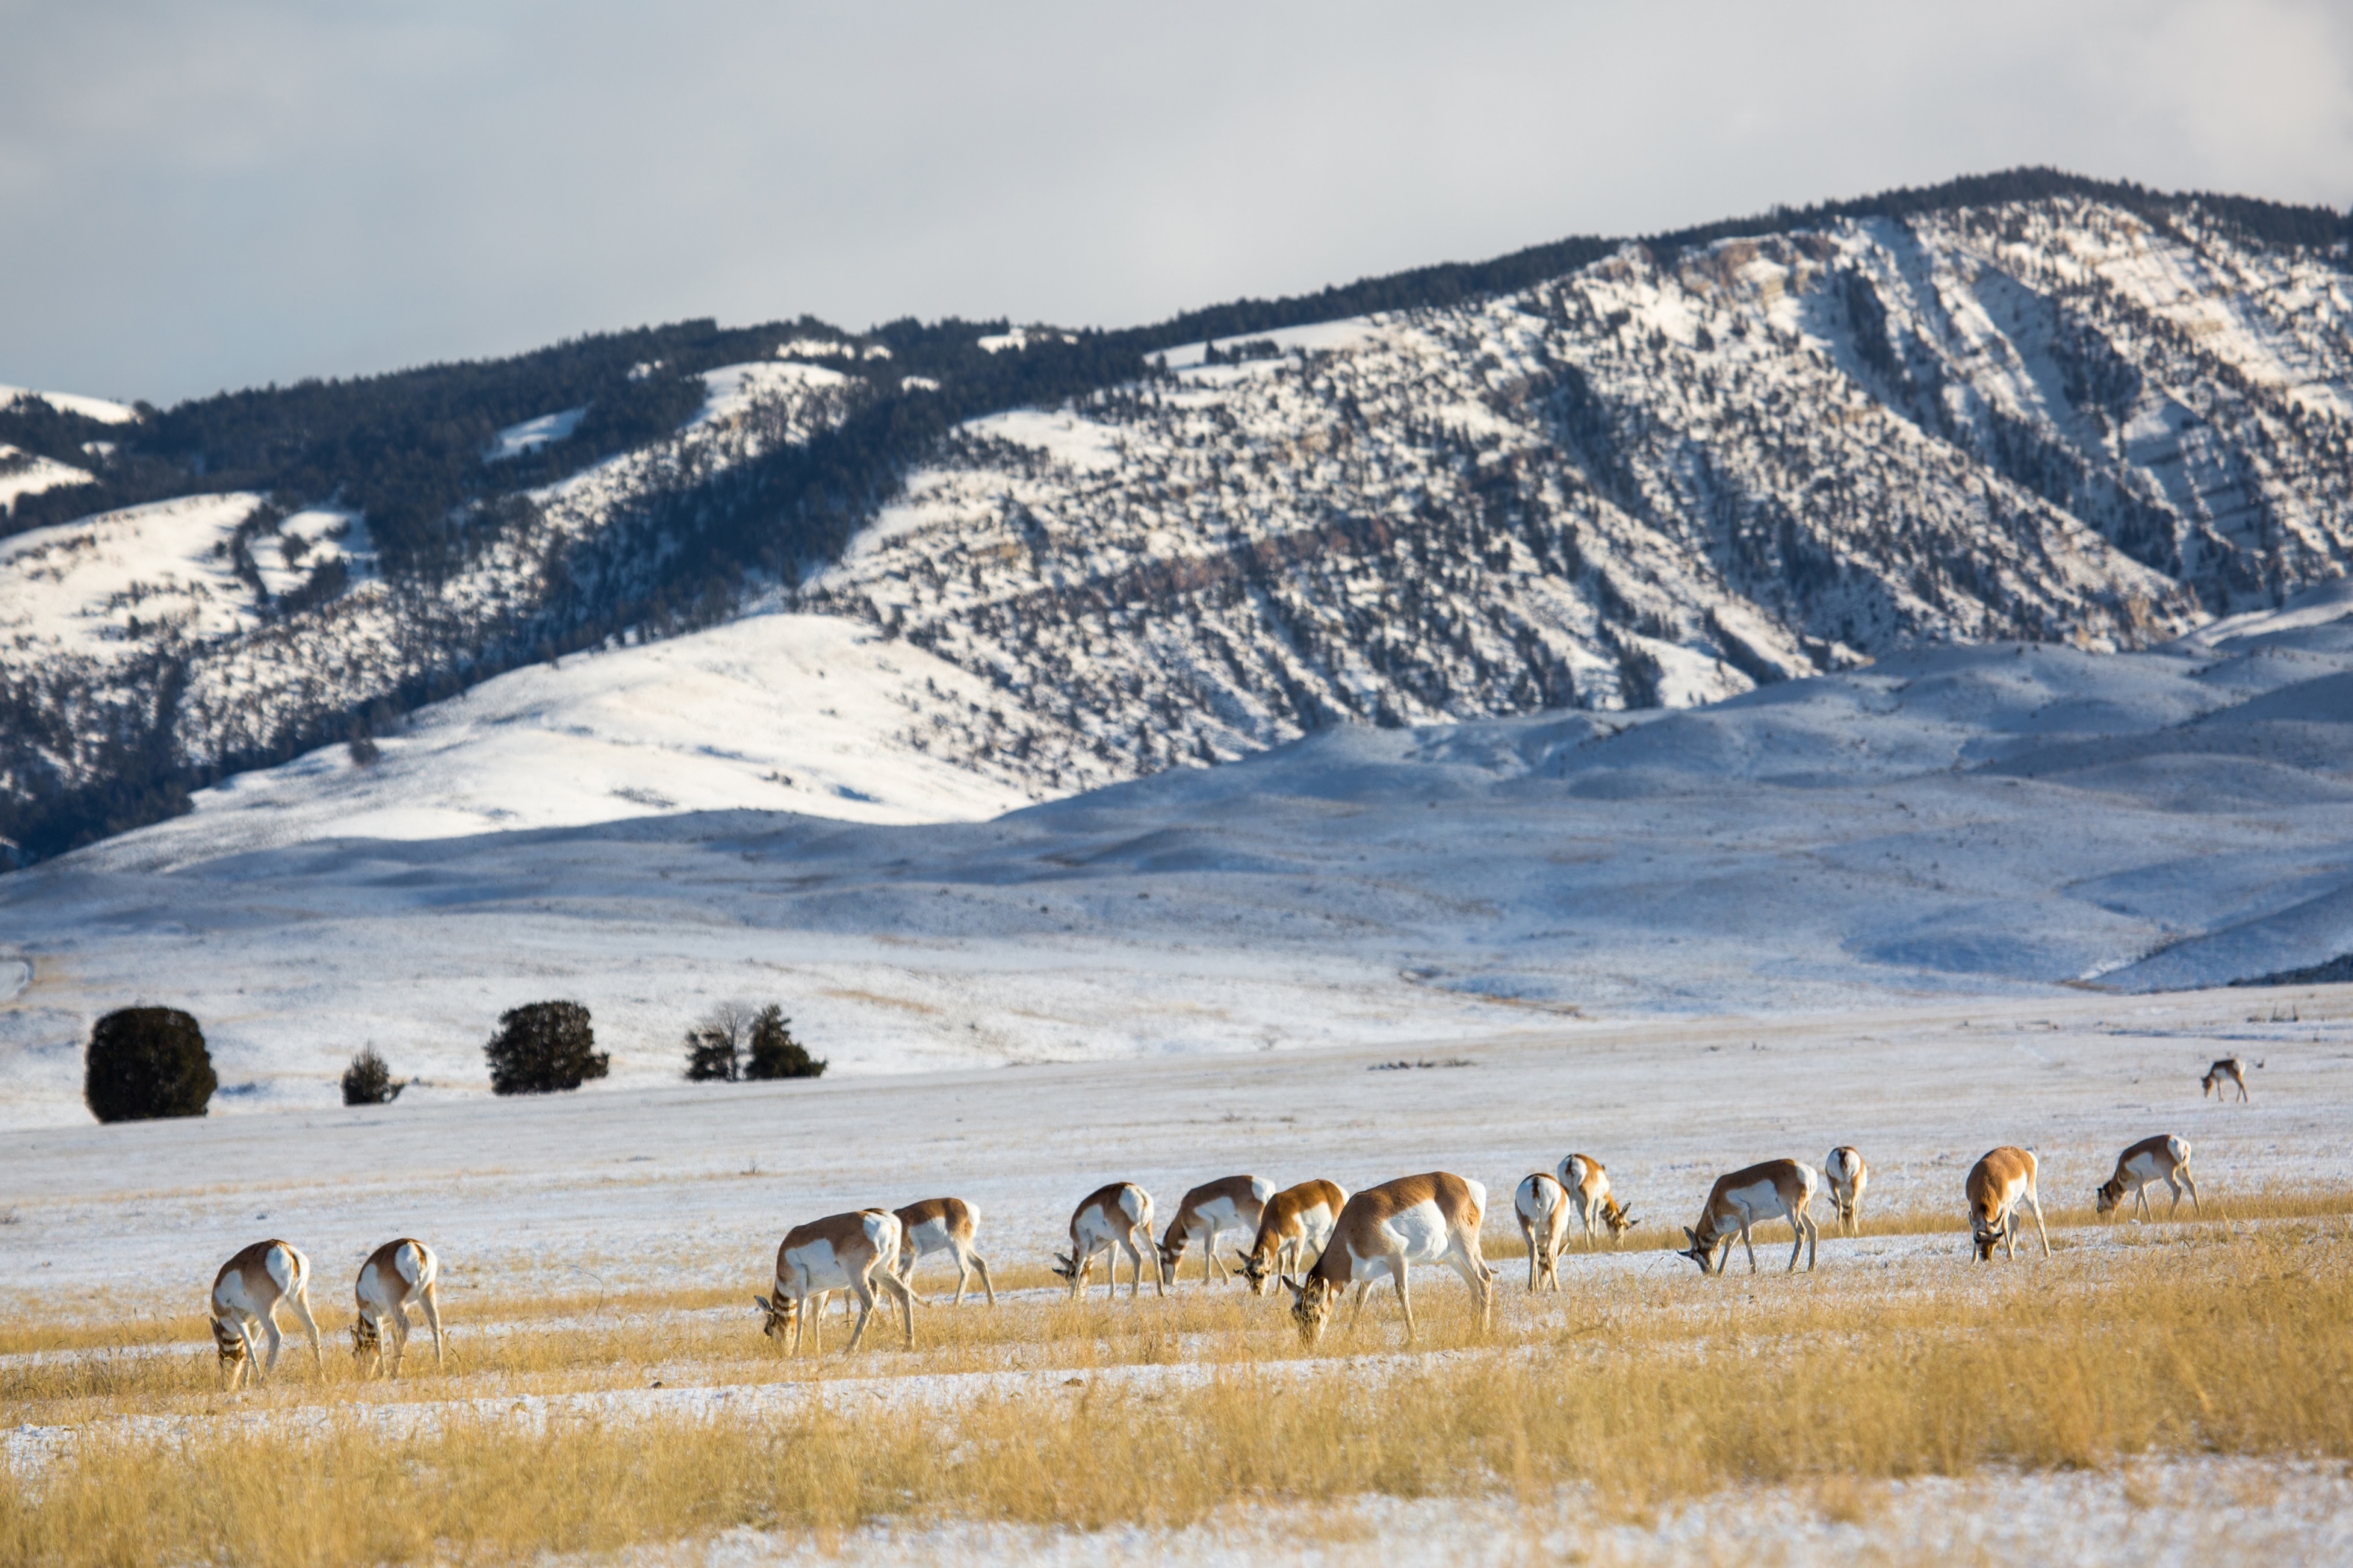 Pronghorn herd in Yellowstone, 12.12.15. NPS photo